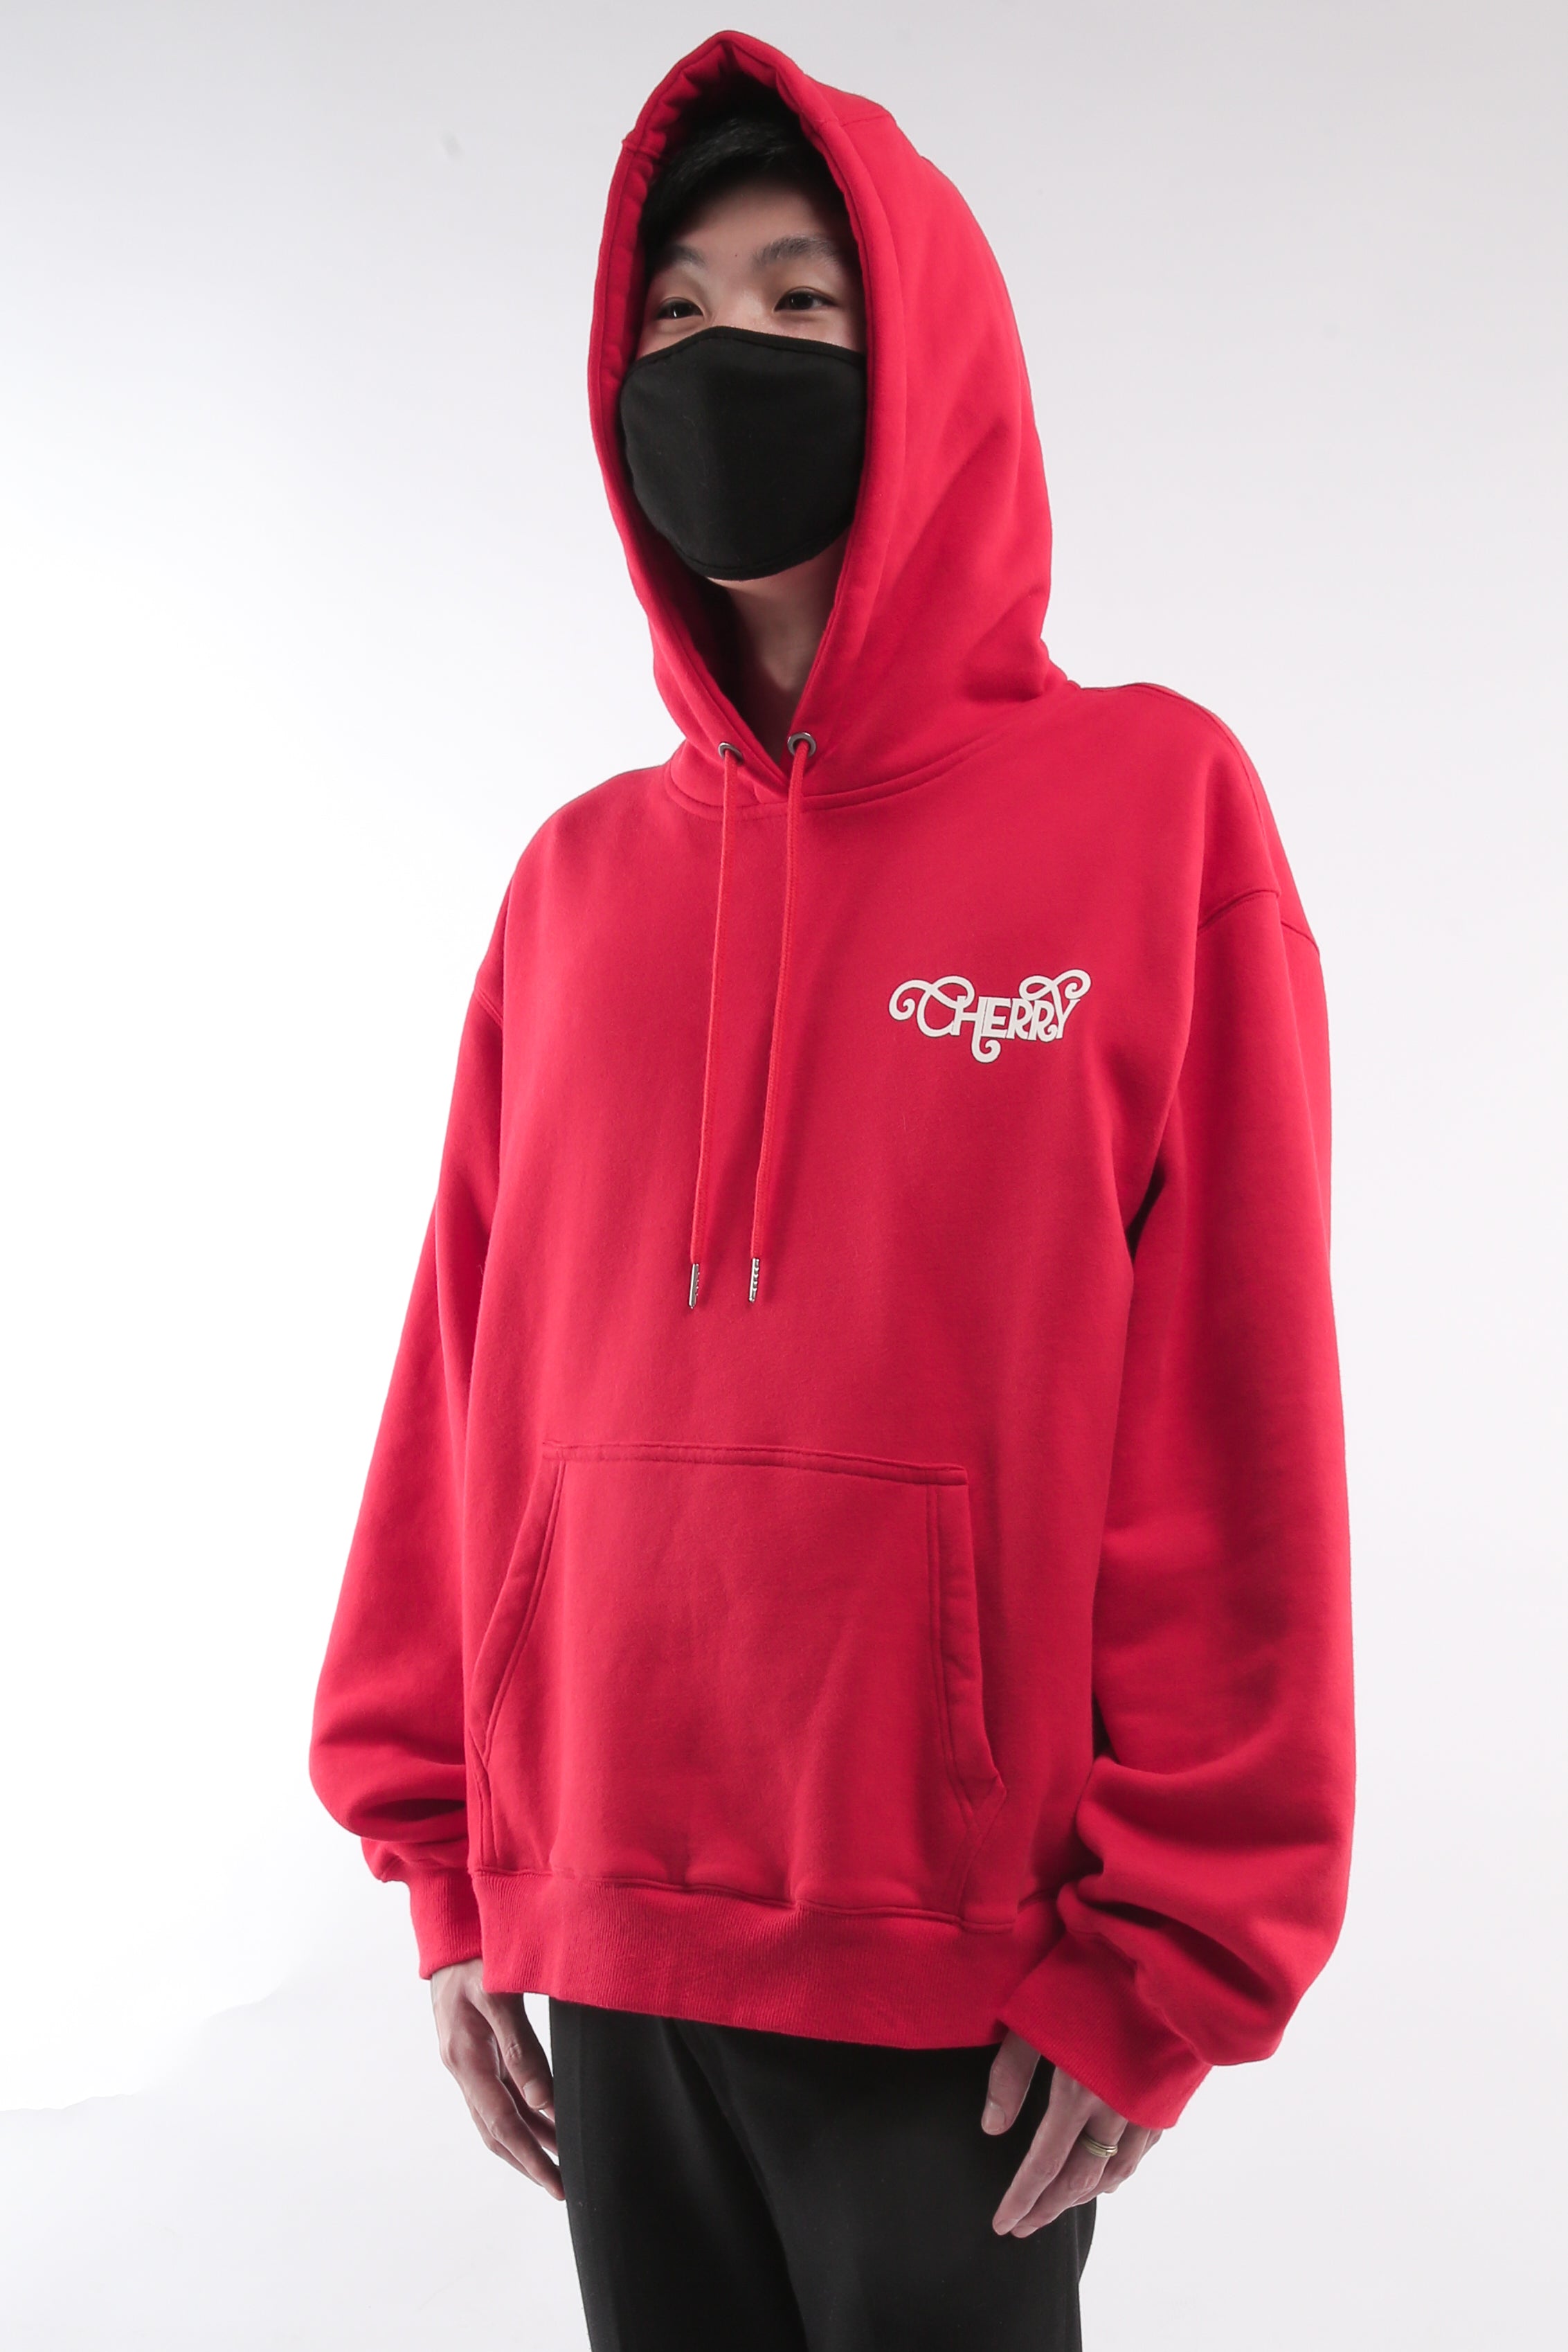 CHERRY DISCOTHEQUE - REFLECTIVE LOGO HOODIE IN CHERRY RED